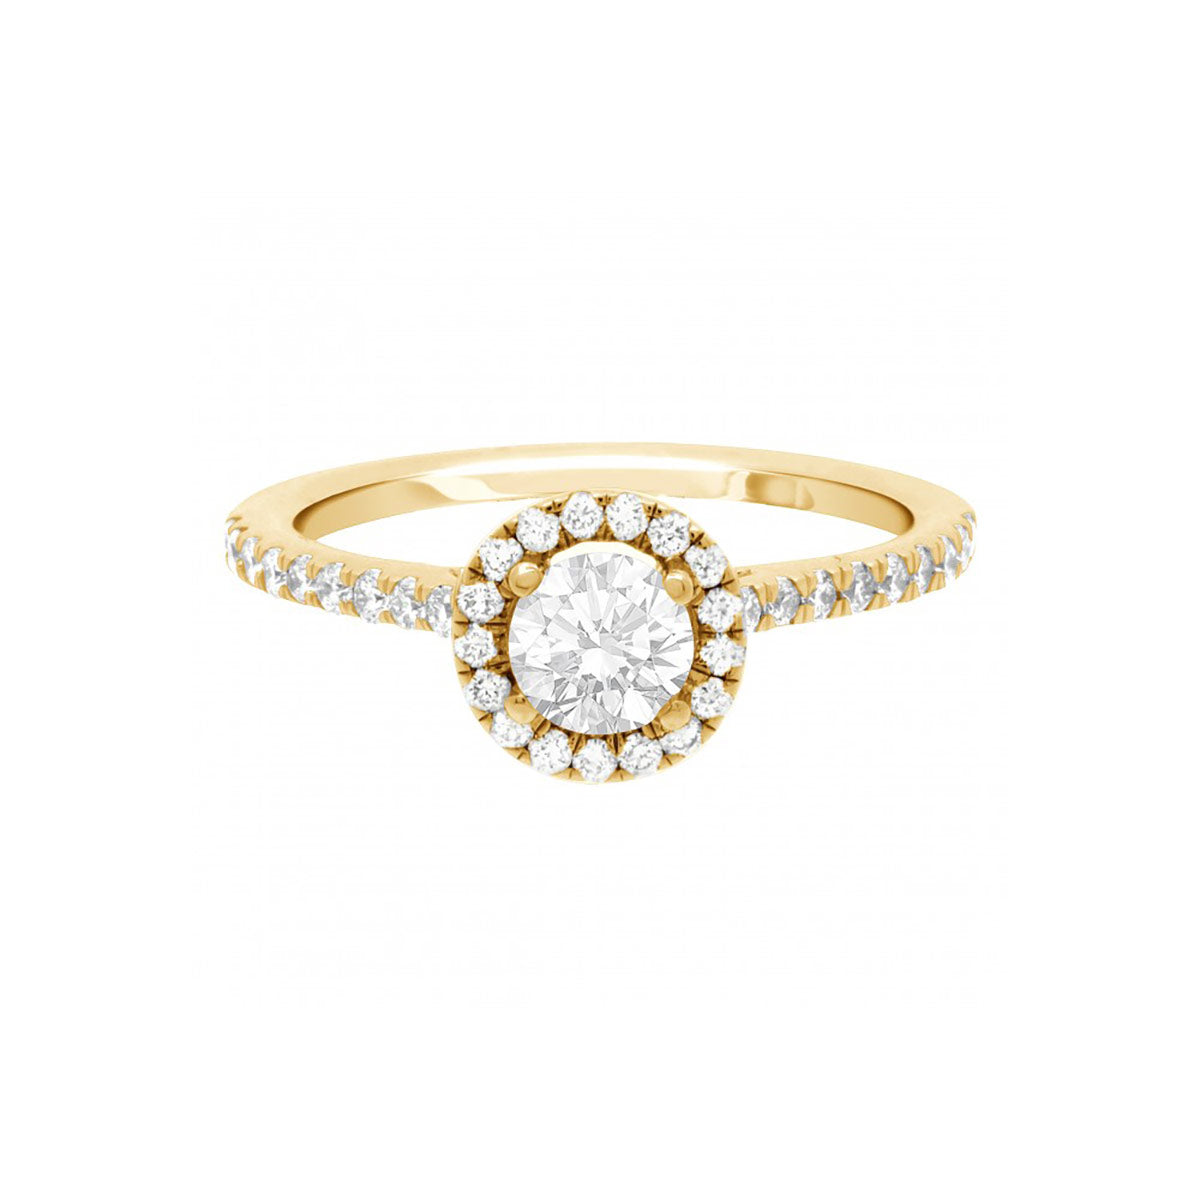 Round Halo Diamond Ring in yellow gold laying flat on a white surface